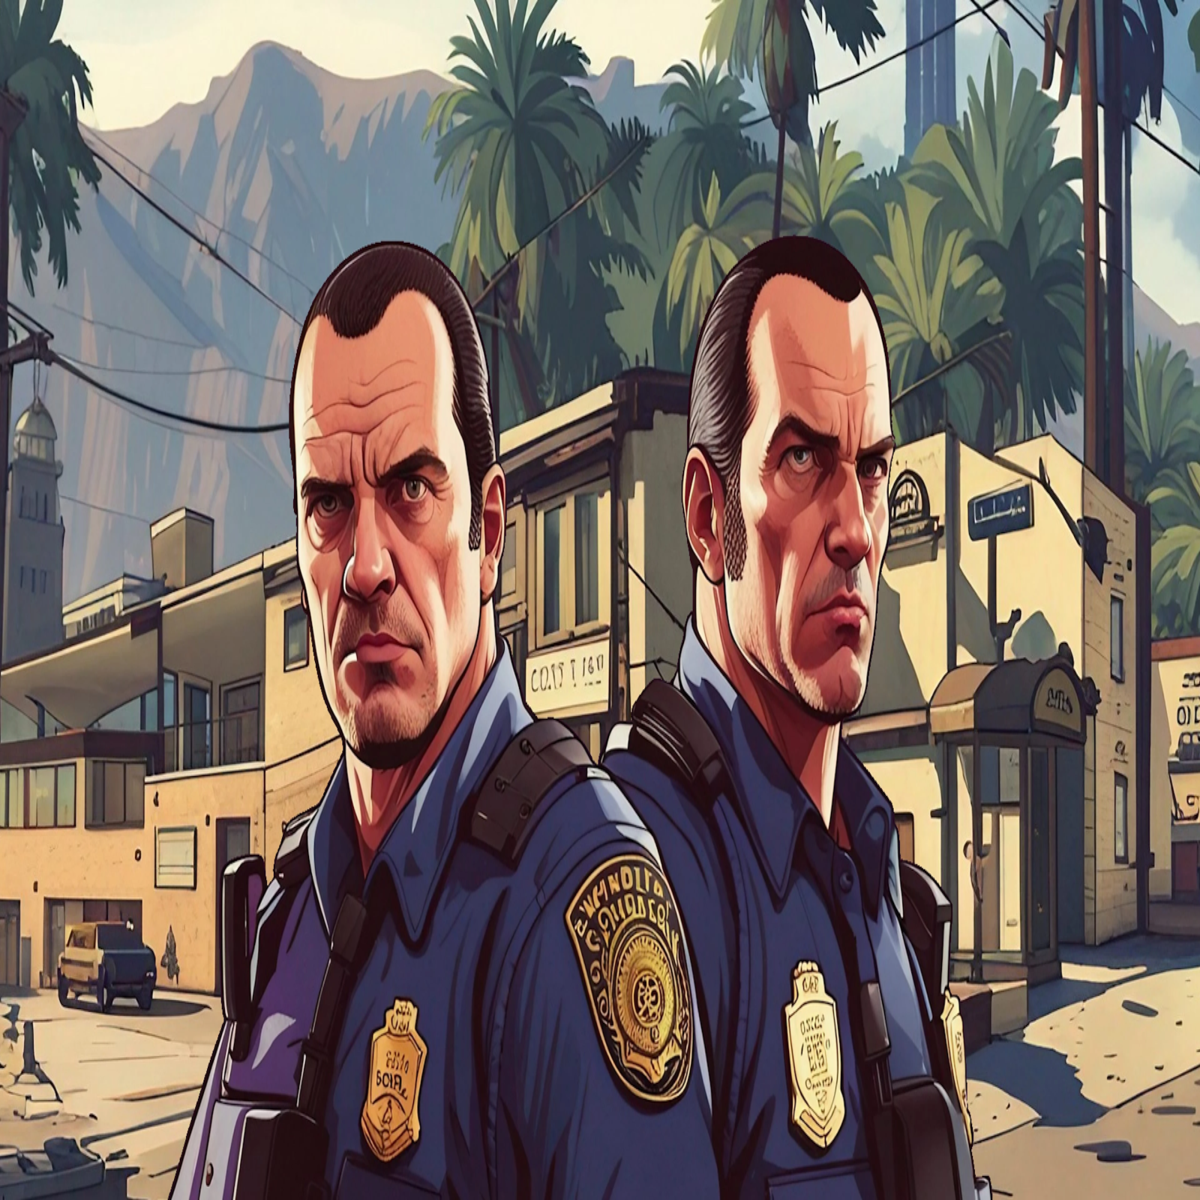 5 best GTA mods for Android